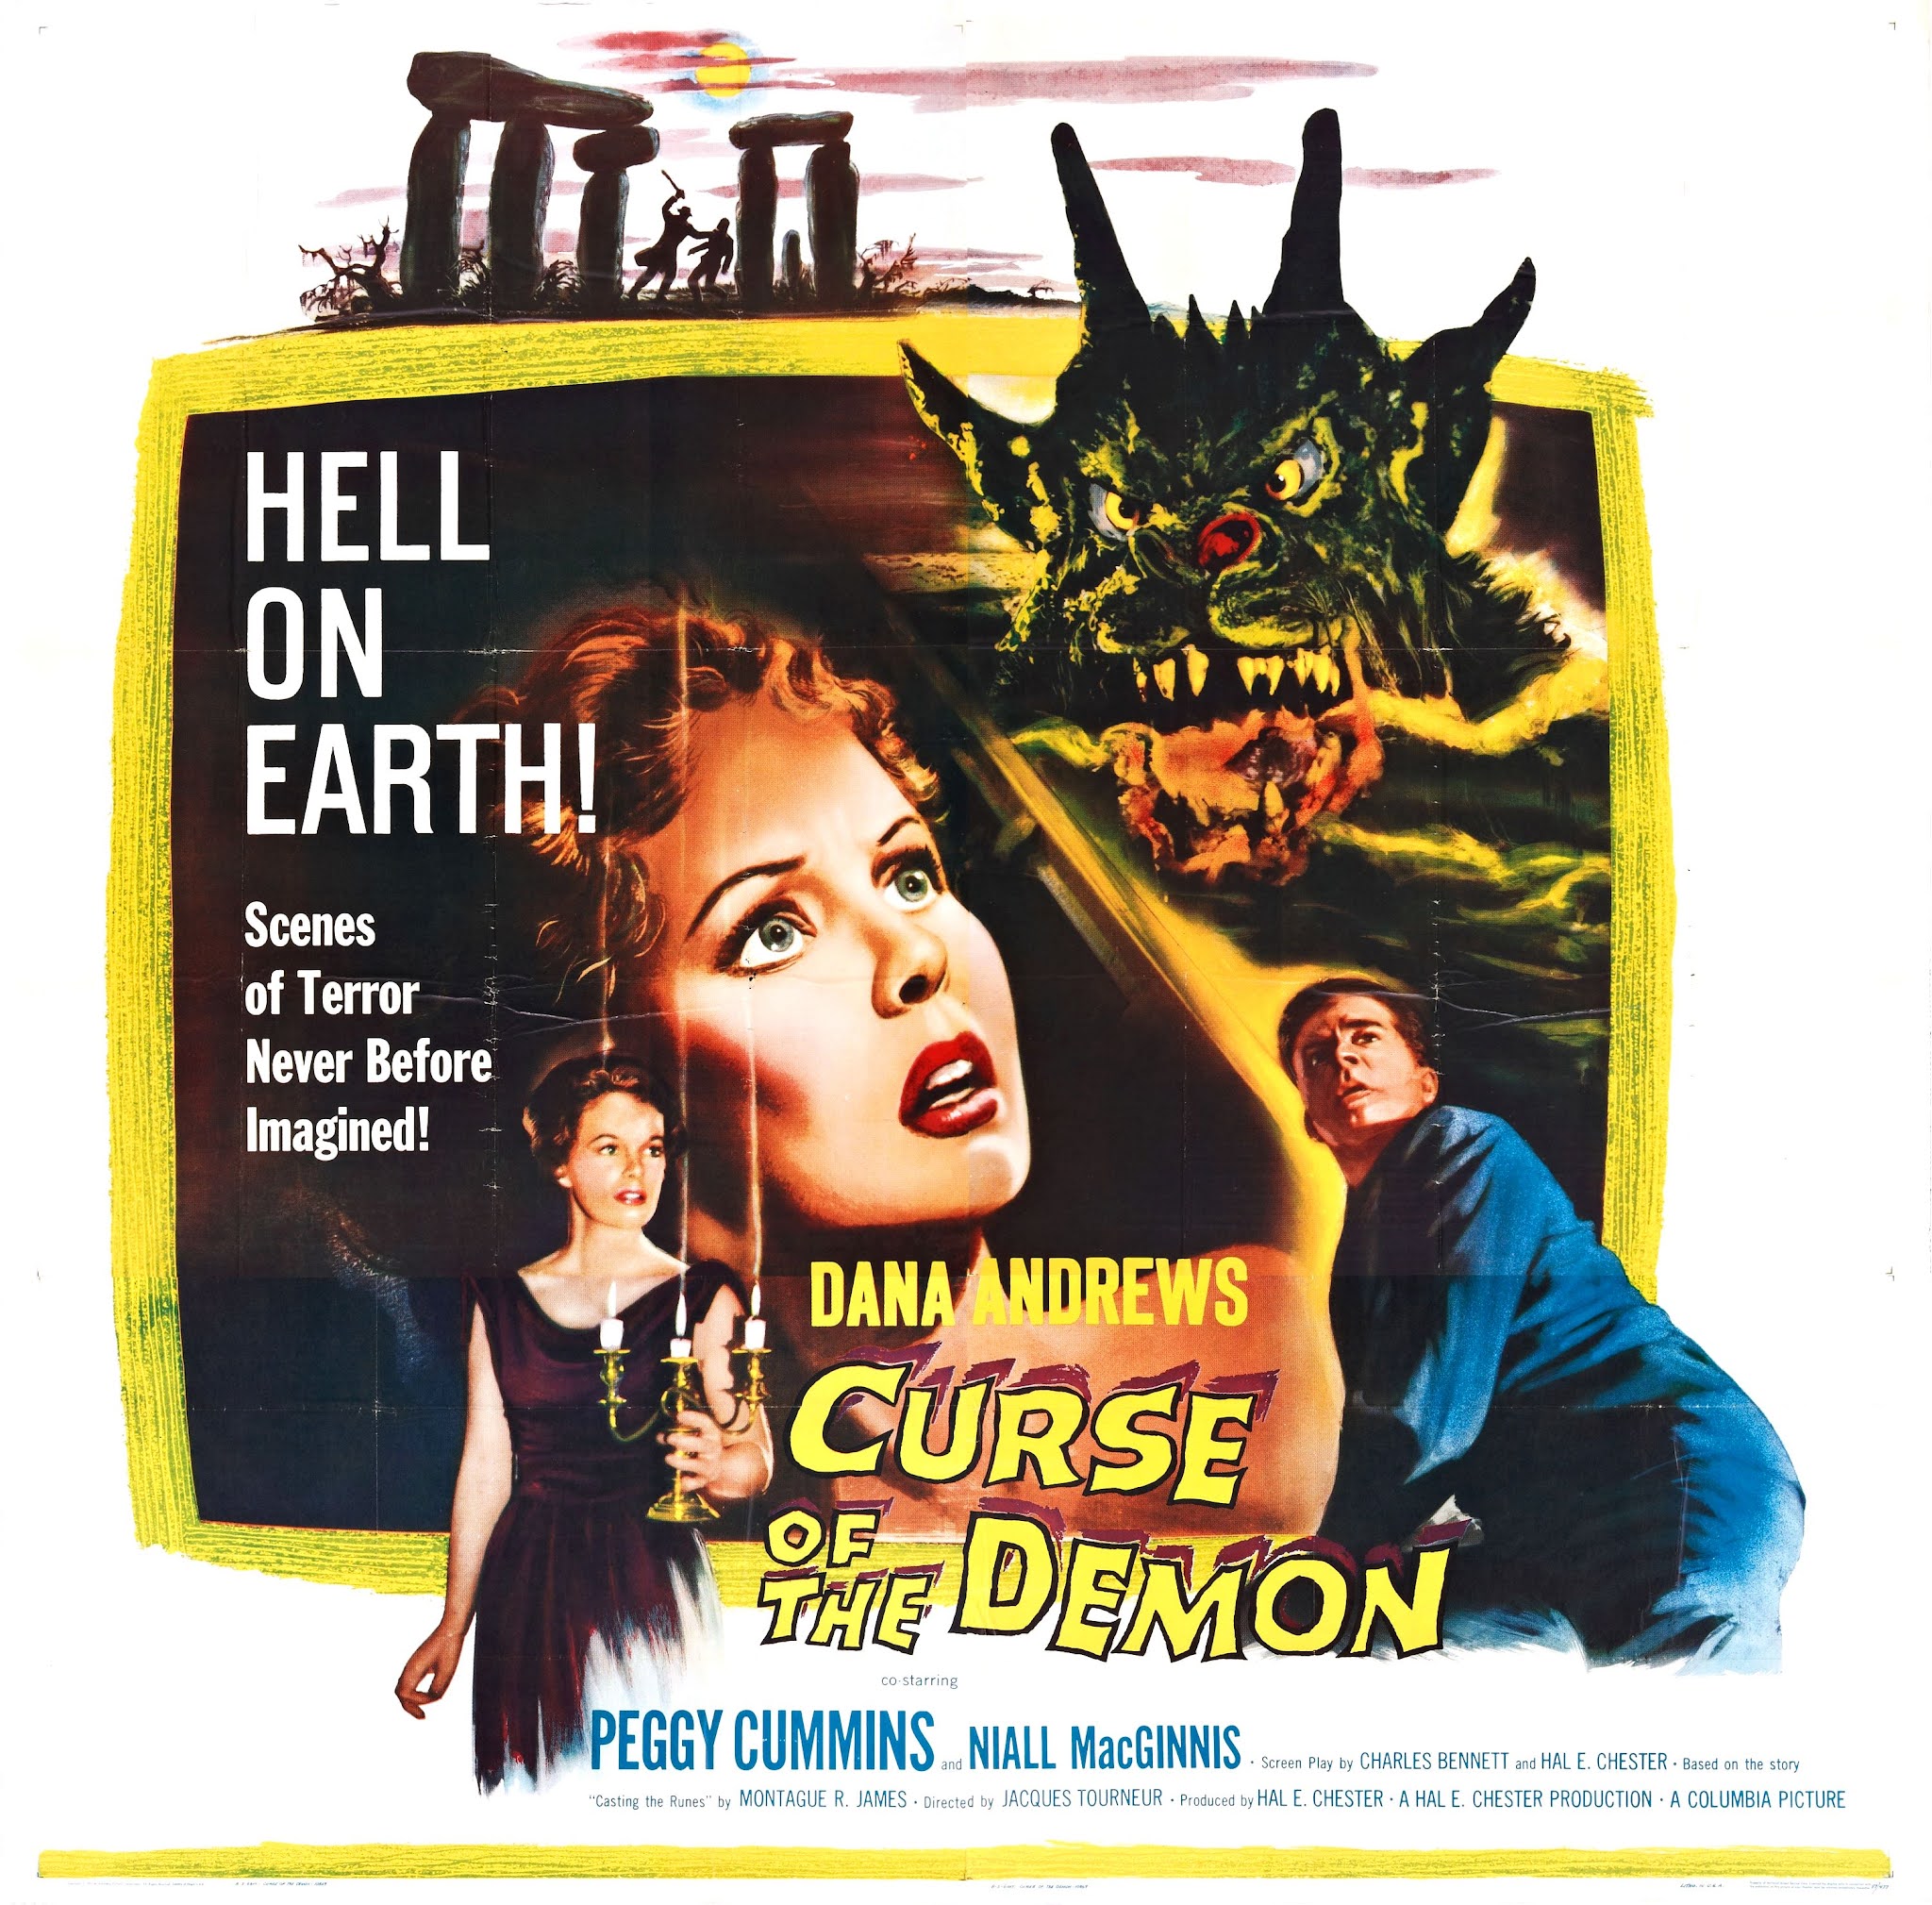 Curse of the Demon (1957) - Turner Classic Movies